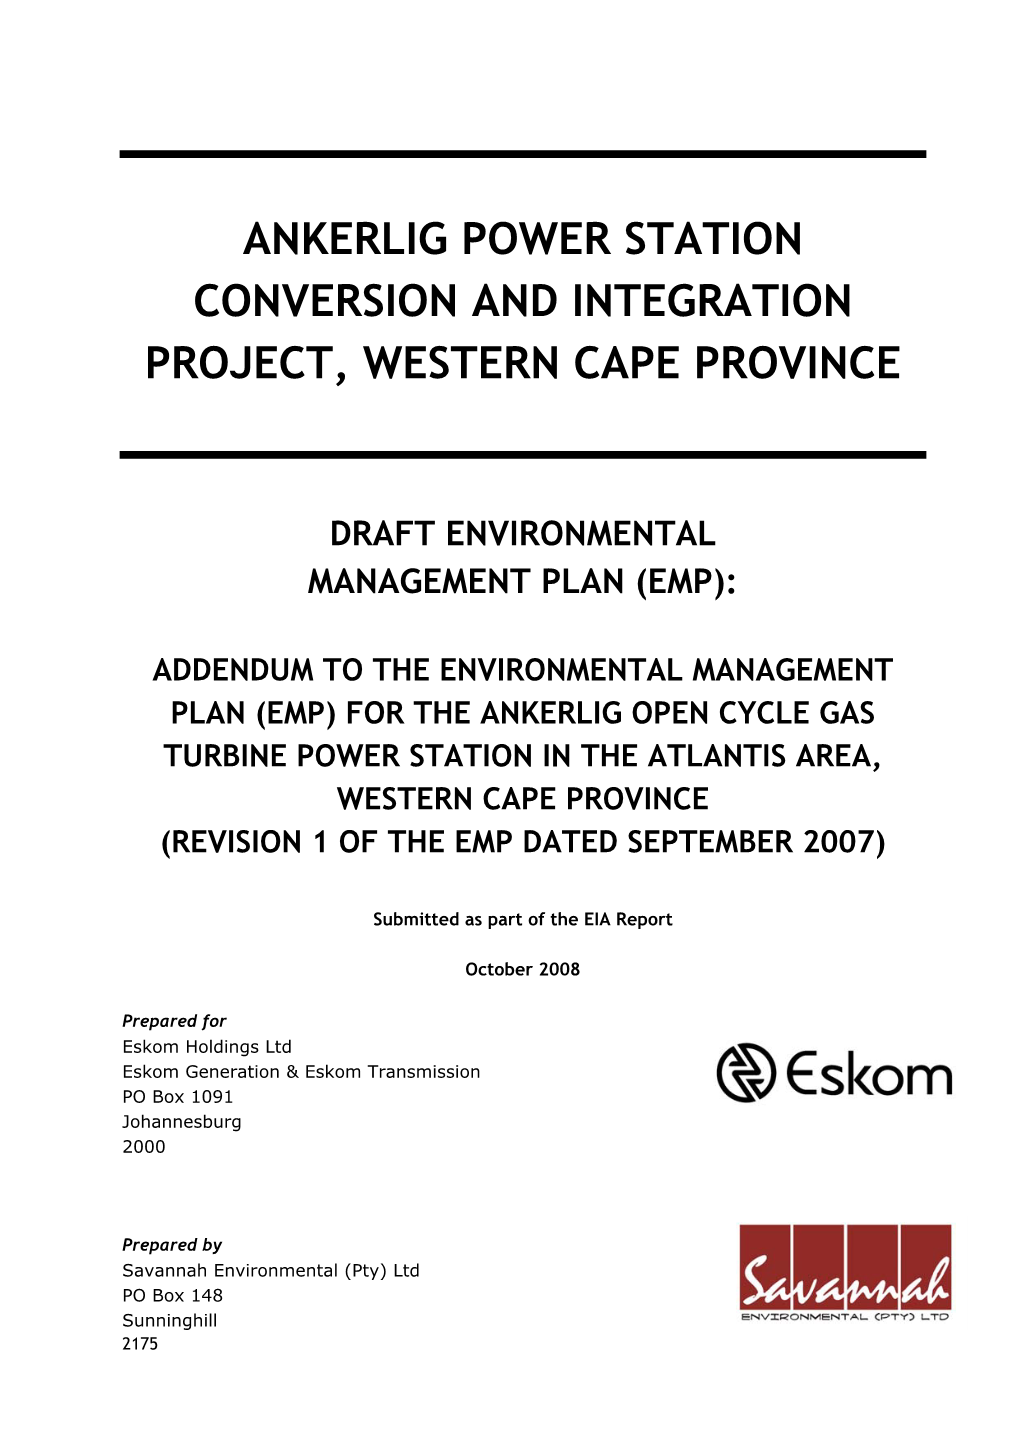 Ankerlig Power Station Conversion and Integration Project, Western Cape Province